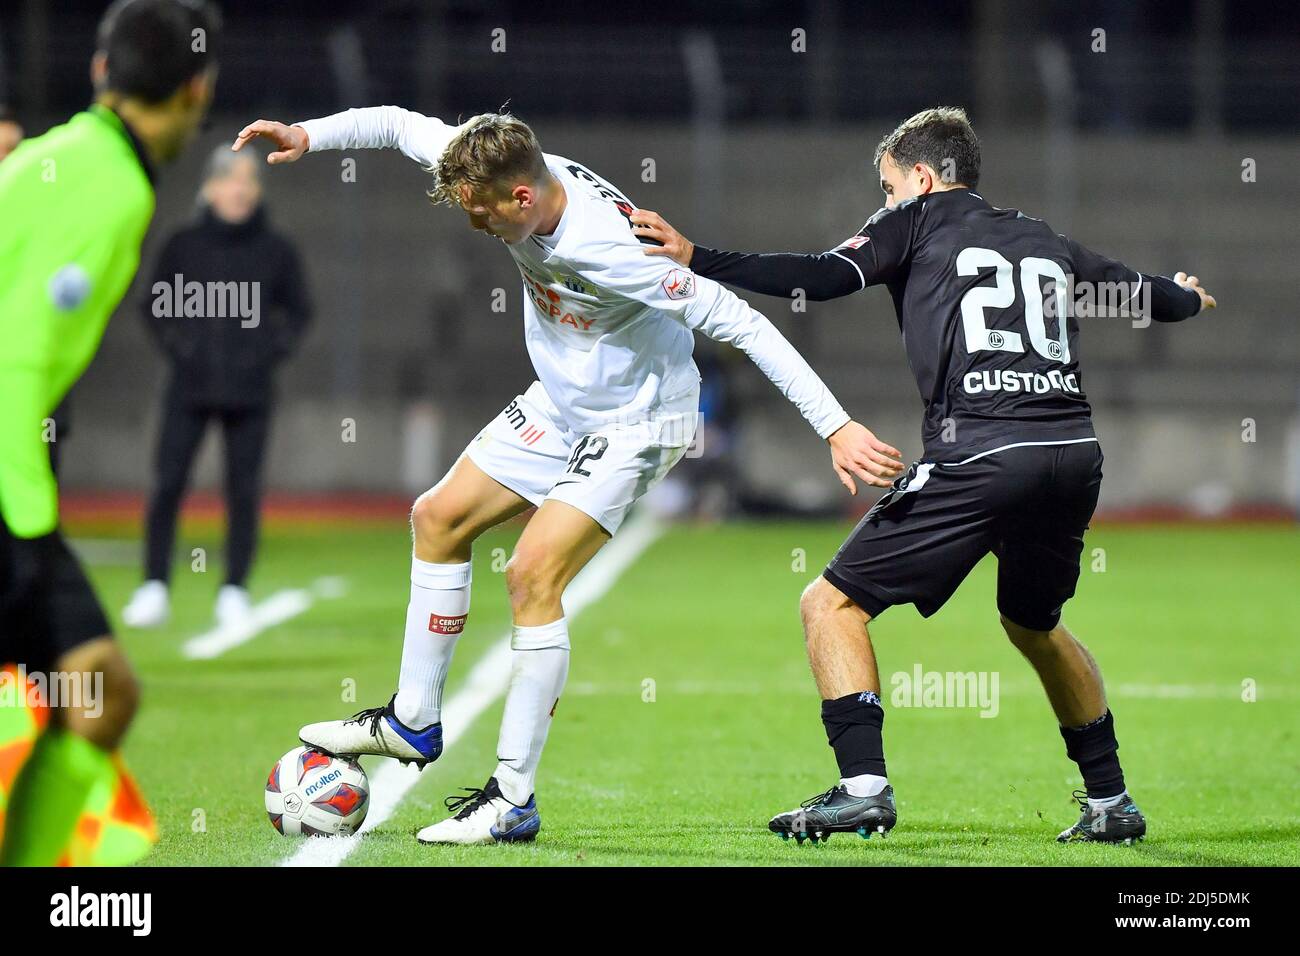 Lugano, Switzerland. 13th Dec, 2020. Blaz Kramer (#18 Zurich) and Oliver Custodio (#20 FC Lugano) in action during the Swiss Super League match between FC Lugano and FC Zürich Cristiano Mazzi/SPP Credit: SPP Sport Press Photo. /Alamy Live News Stock Photo